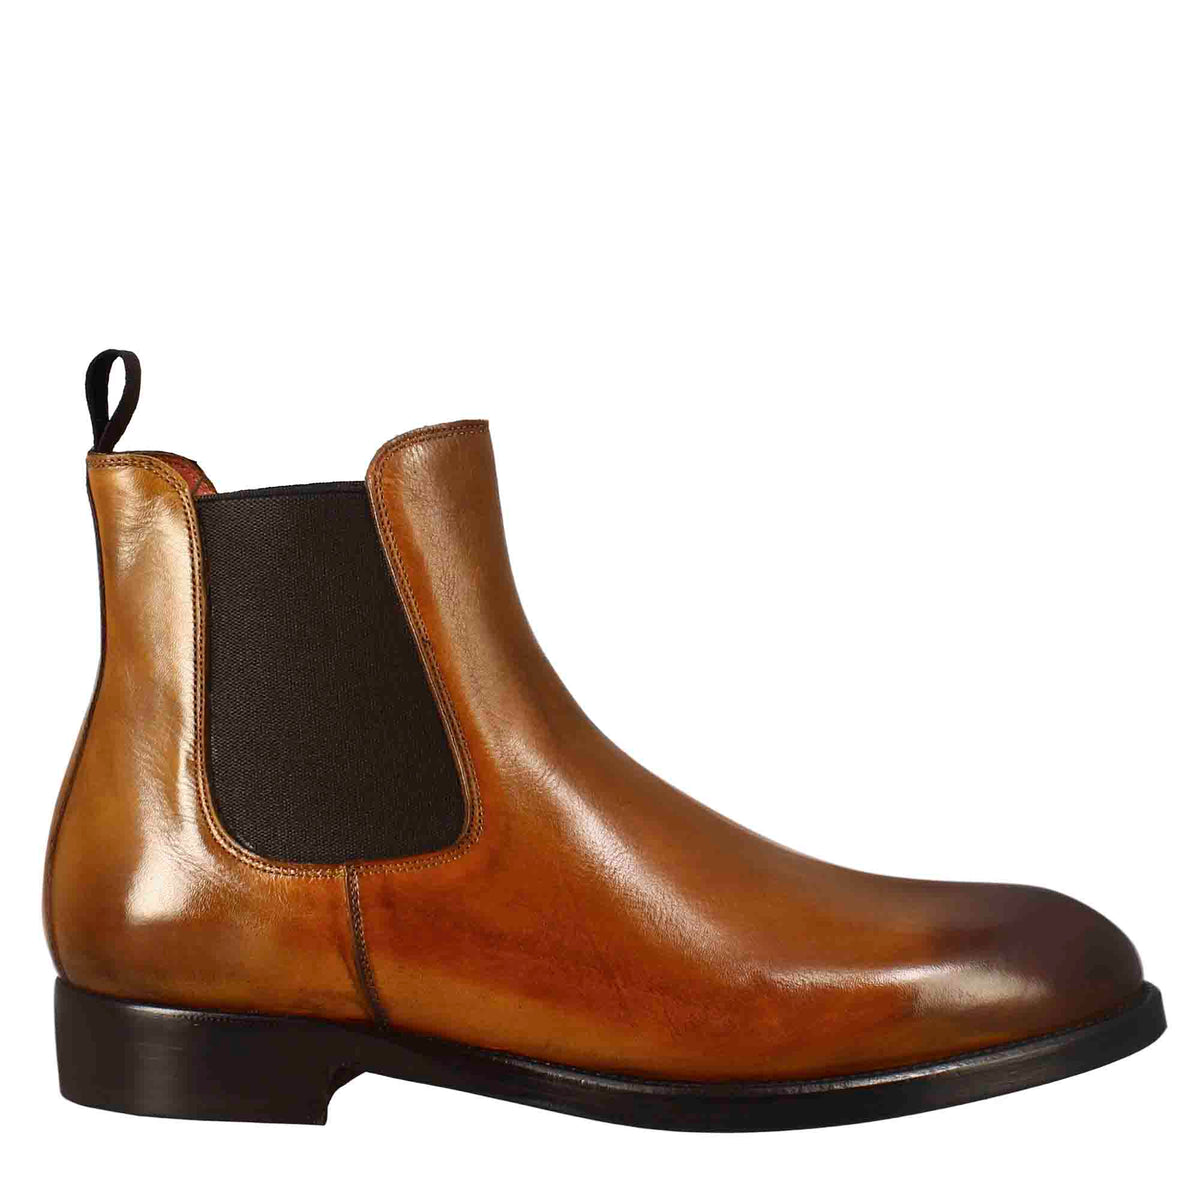 Smooth men's chelsea boot in light brown leather with elastic